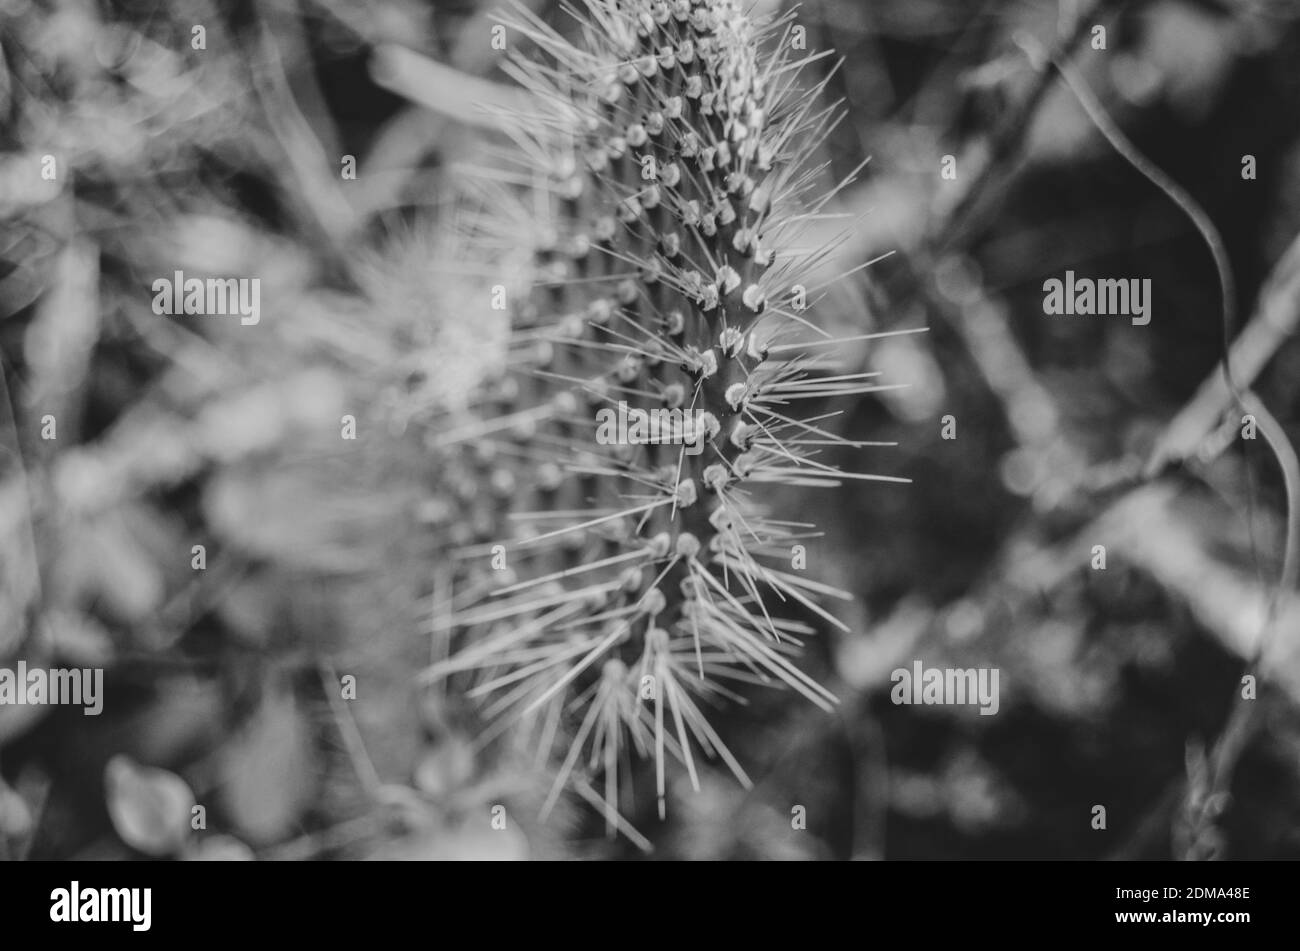 Close up photo of a cactus and its spines with a black and white filter. Stock Photo